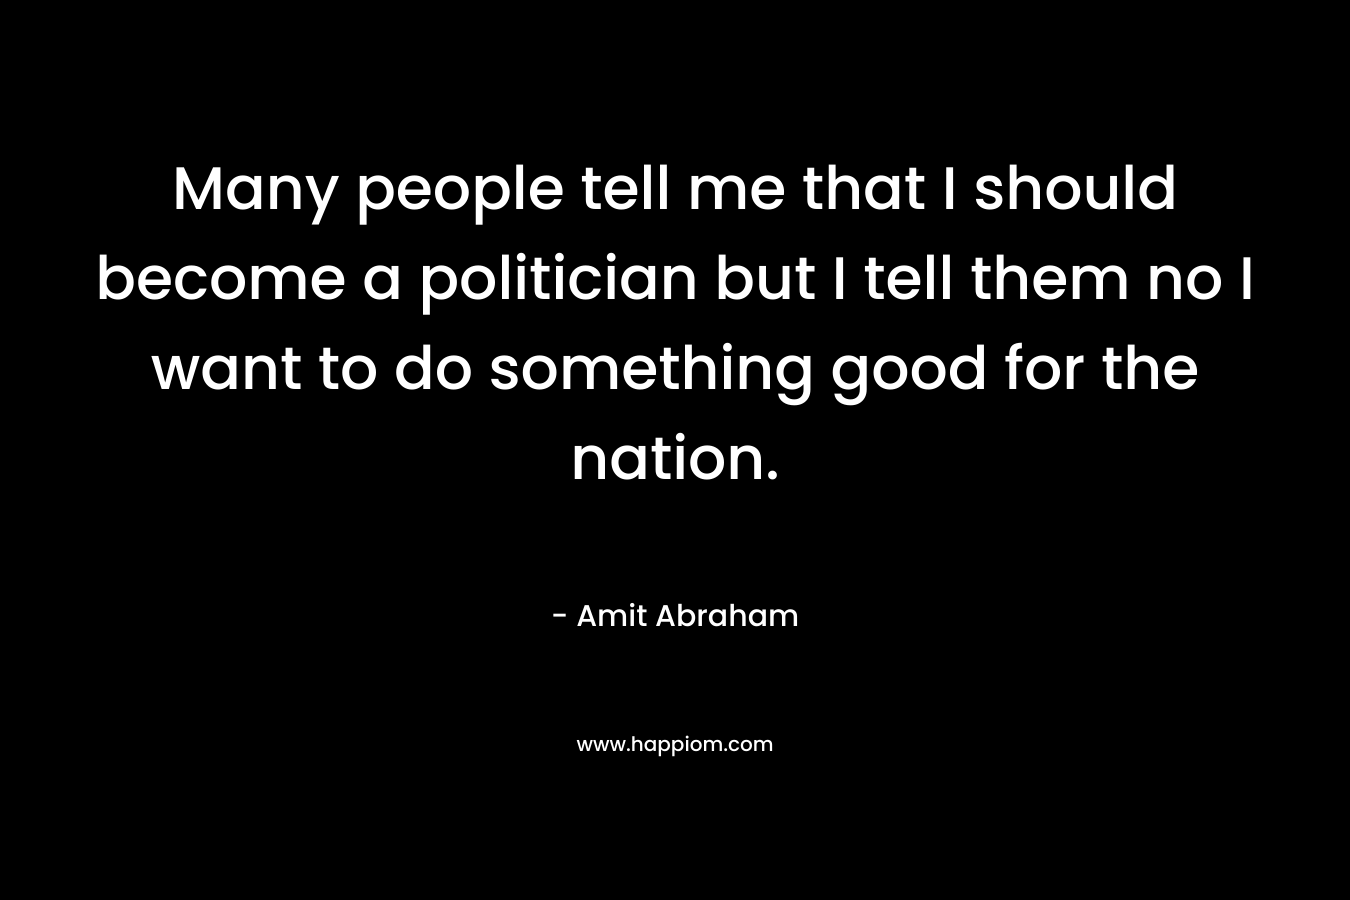 Many people tell me that I should become a politician but I tell them no I want to do something good for the nation. – Amit Abraham